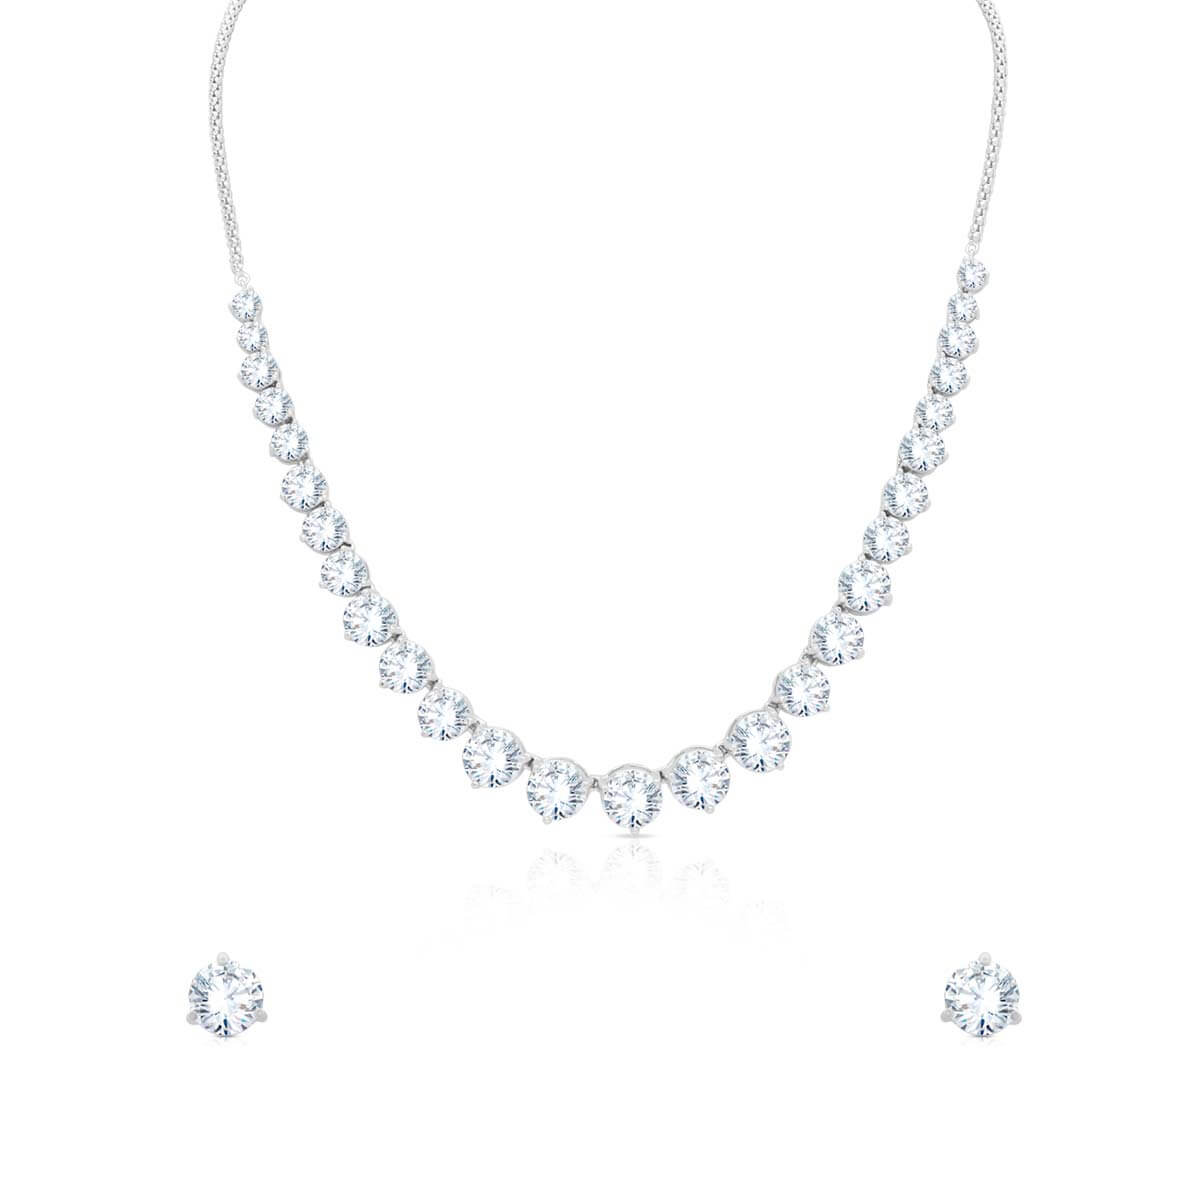 Striking Solitaire Silver Necklace Set